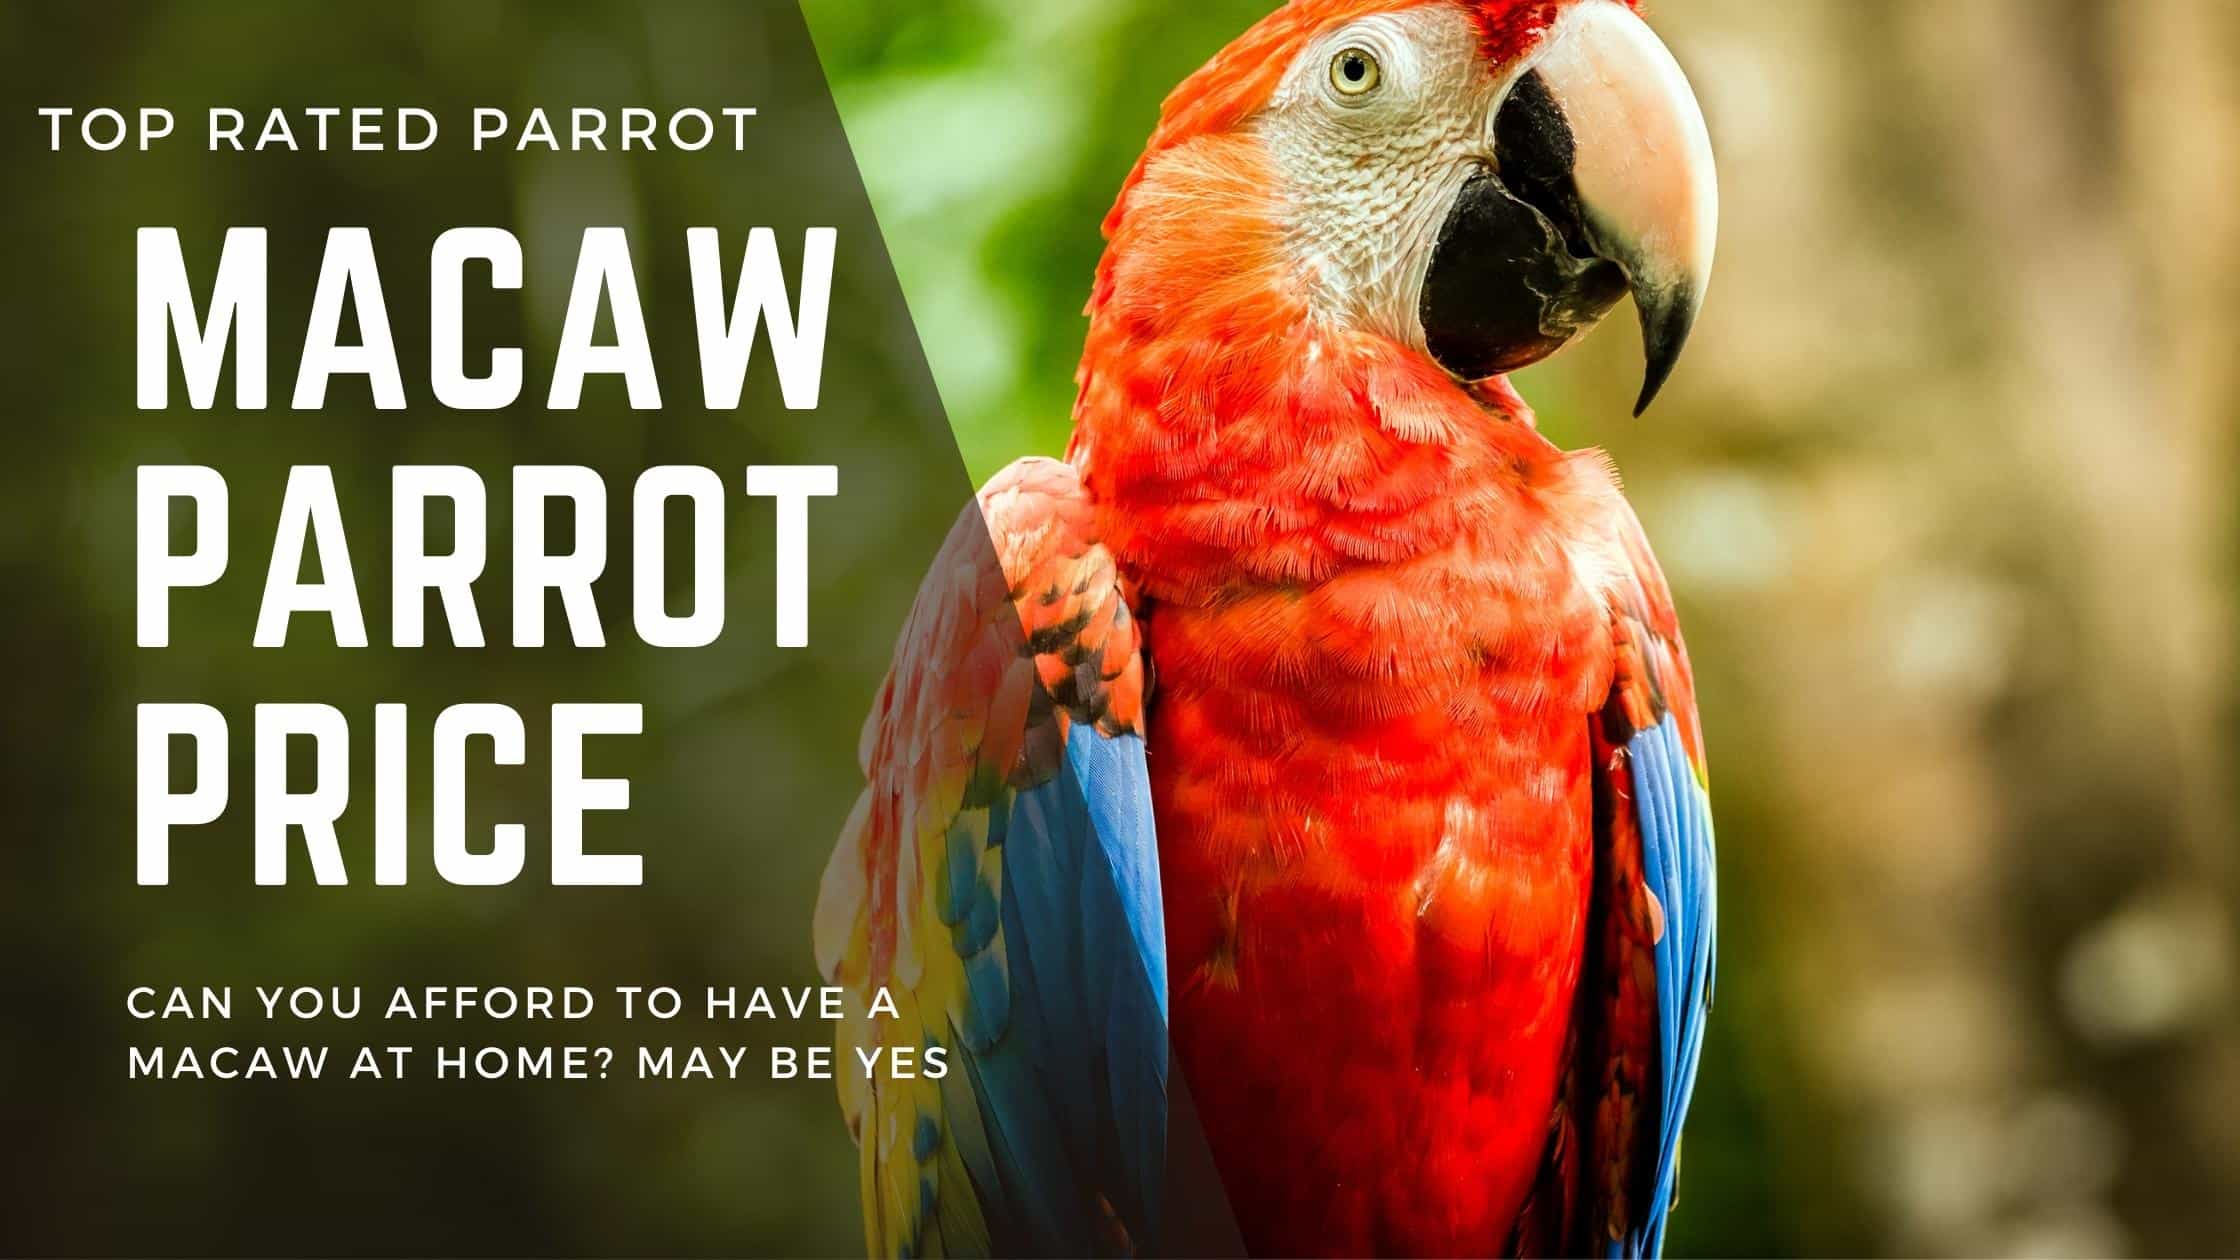 Macaw Parrot Price in Pakistan Guide (2022) - Parrots for Sale